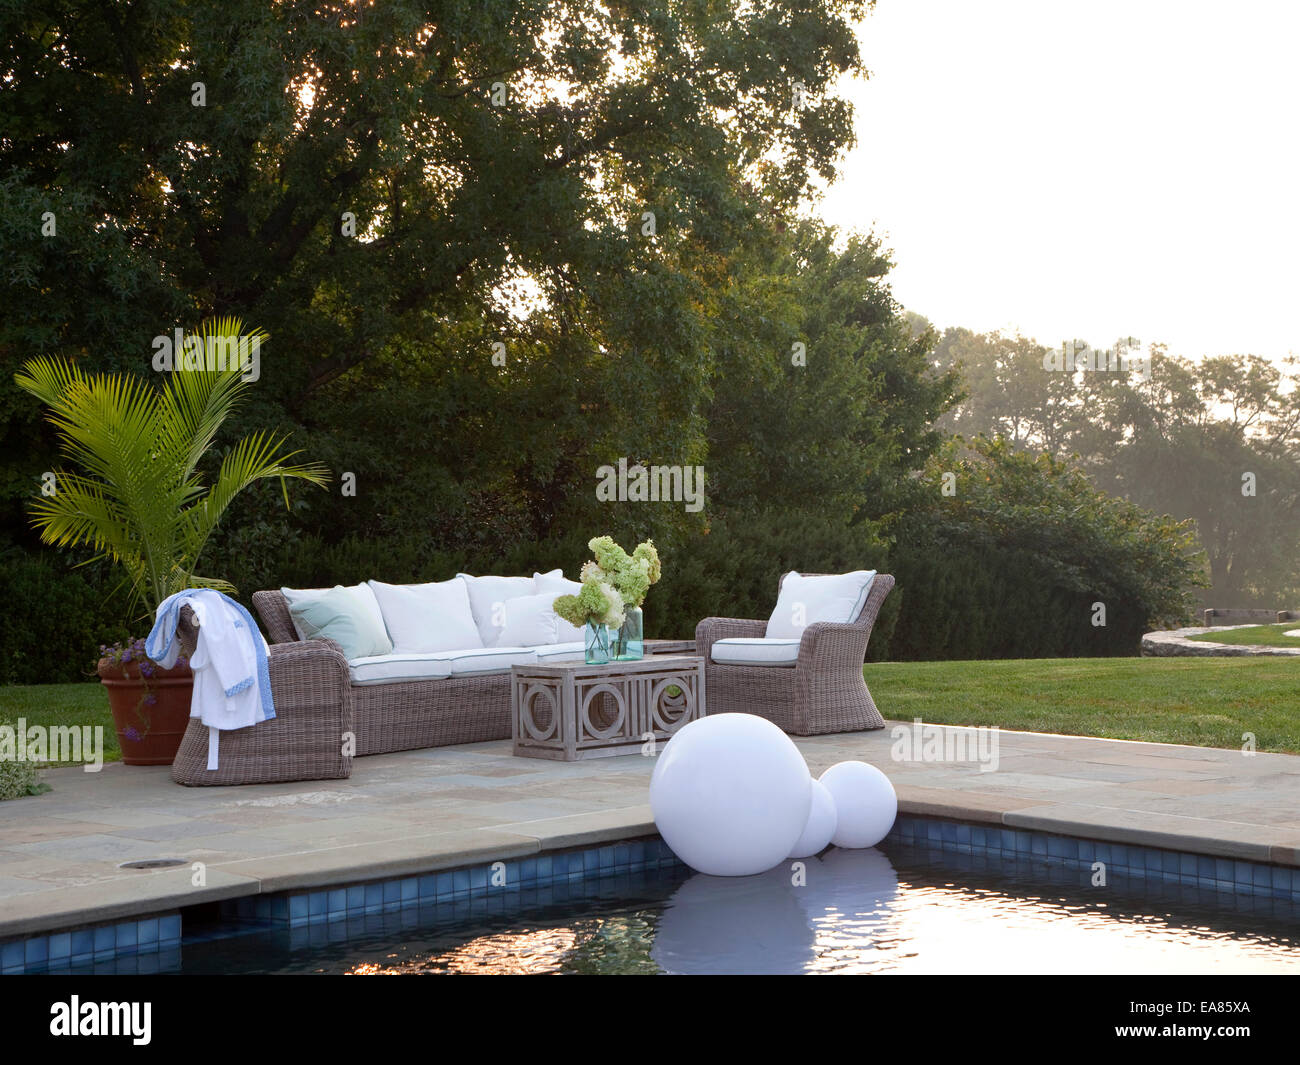 outdoor seating area at swimming pool Stock Photo